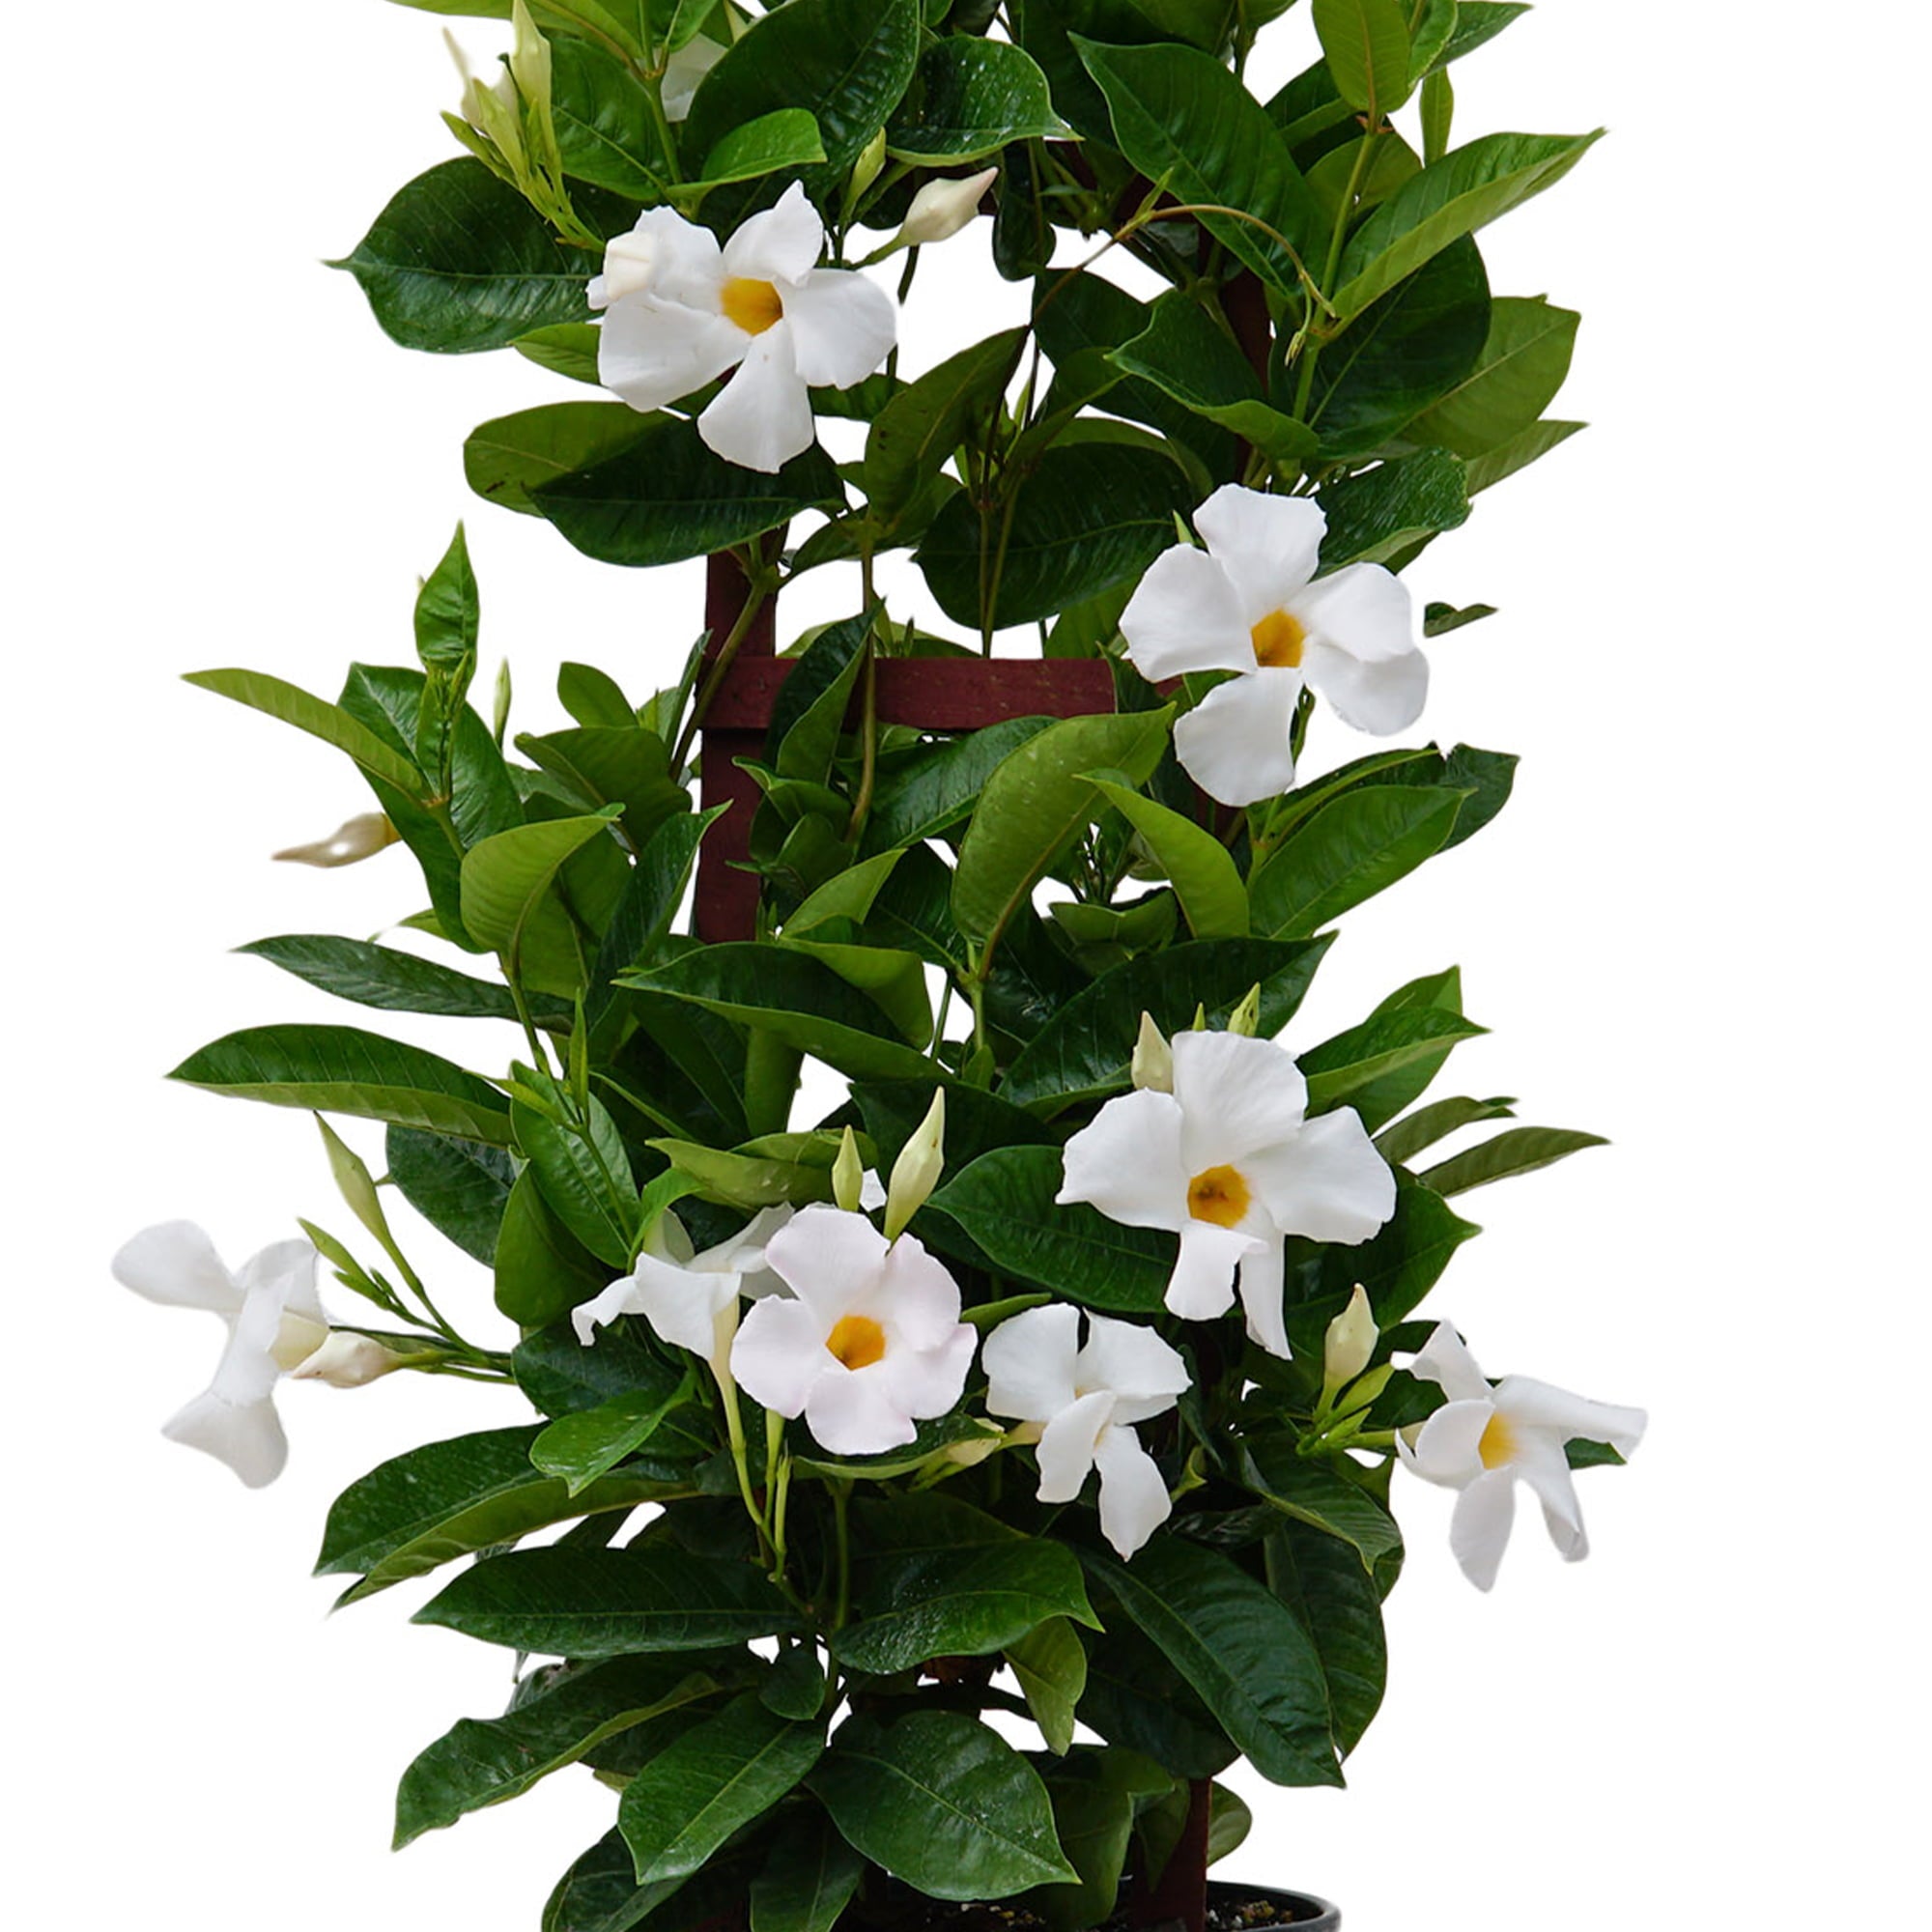 United Nursery Live Mandevilla Trellis White Plant 28-30 Inches Tall in 9.25 Inch Grower Pot